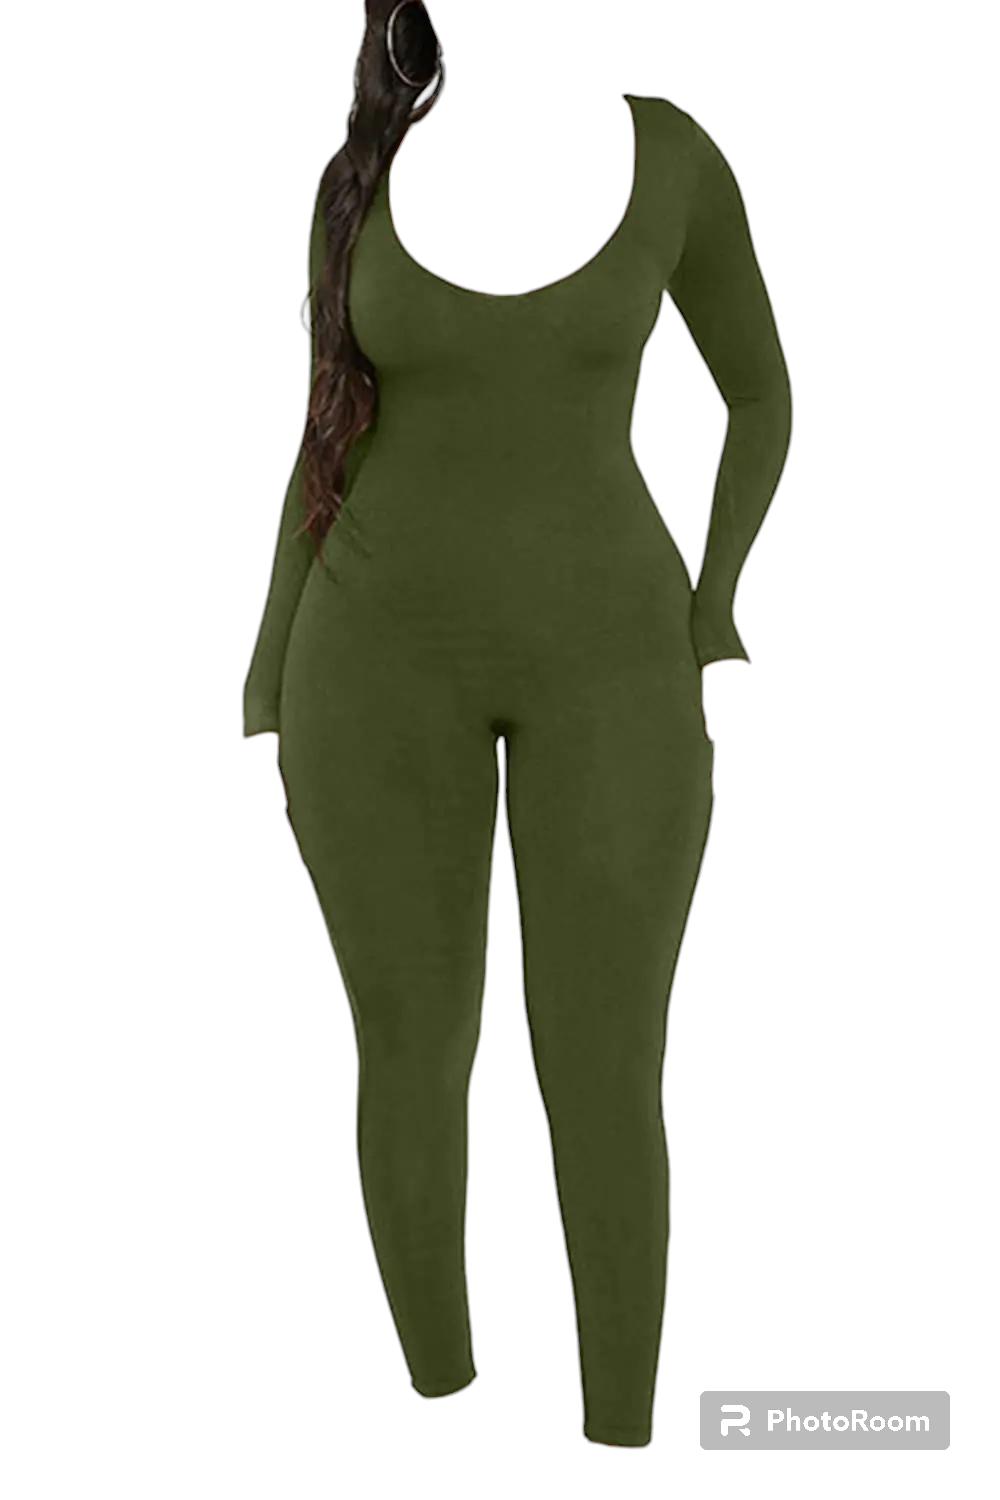 II Women's Rompers Long Sleeve Solid Skinny Bodycon Jumpsuits Fashion Sports Fitness Casual Activity Streetwear Overalls